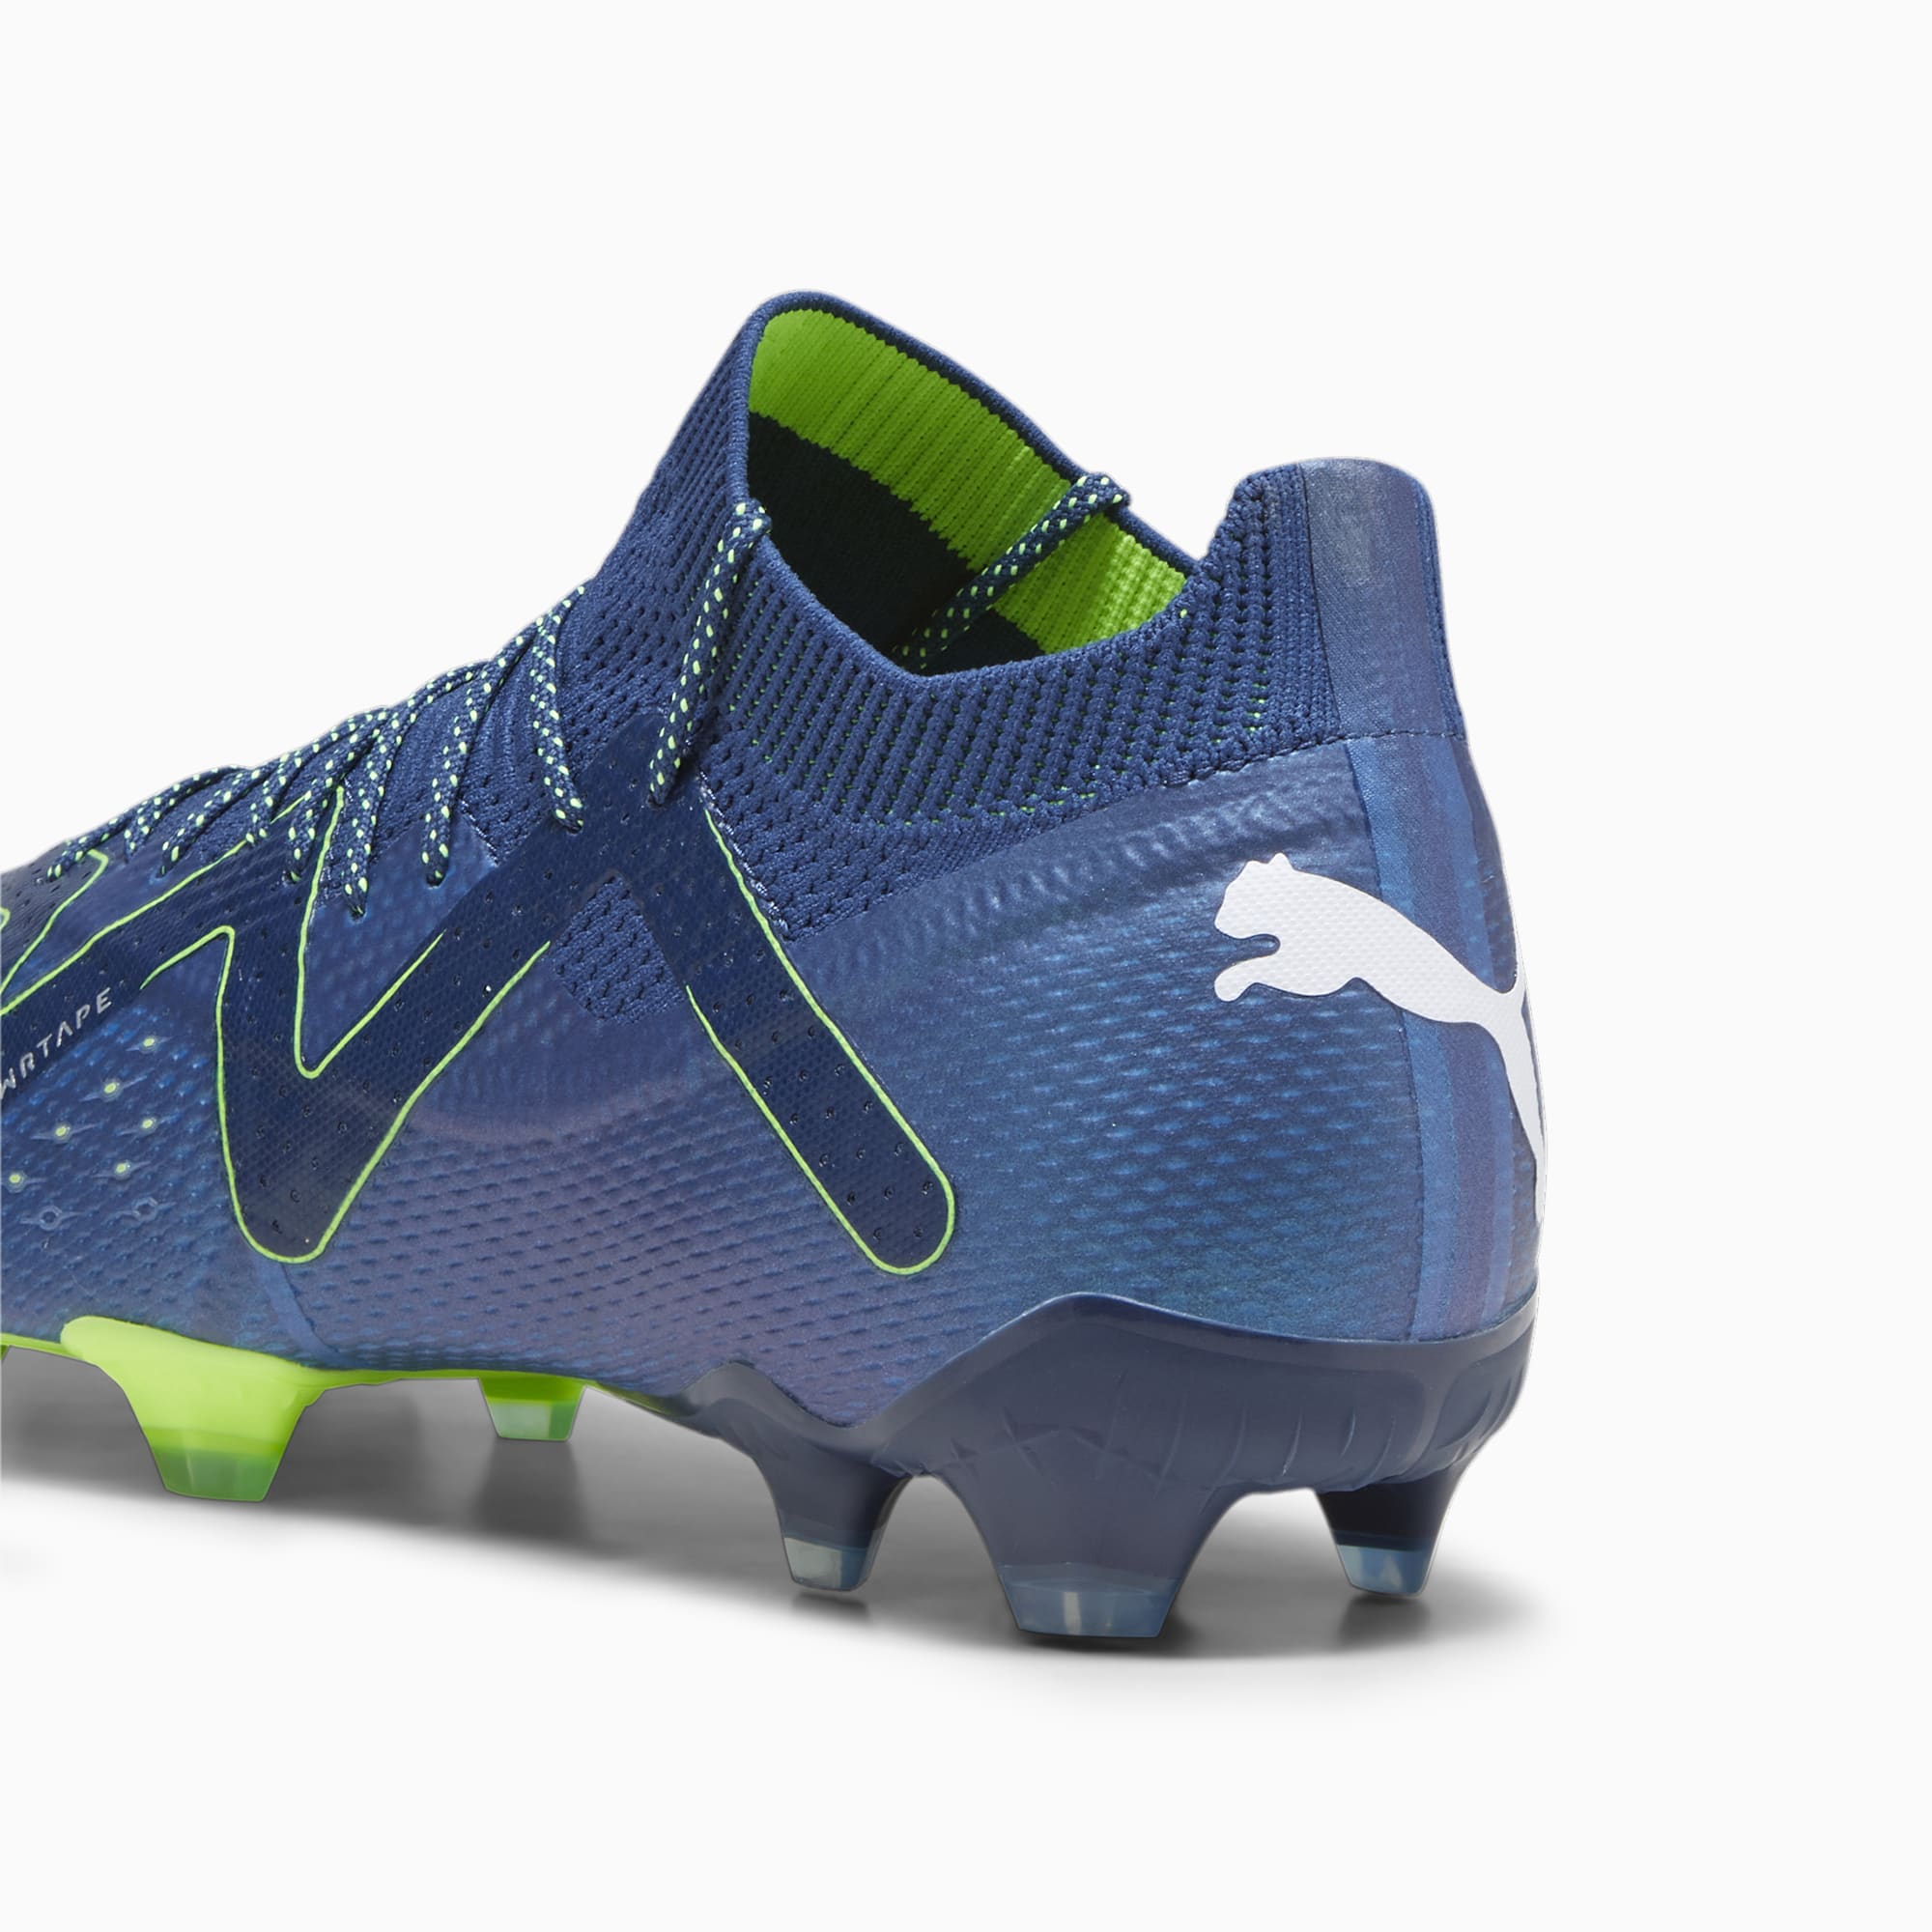 FUTURE ULTIMATE FG/AG Men's Soccer Cleats